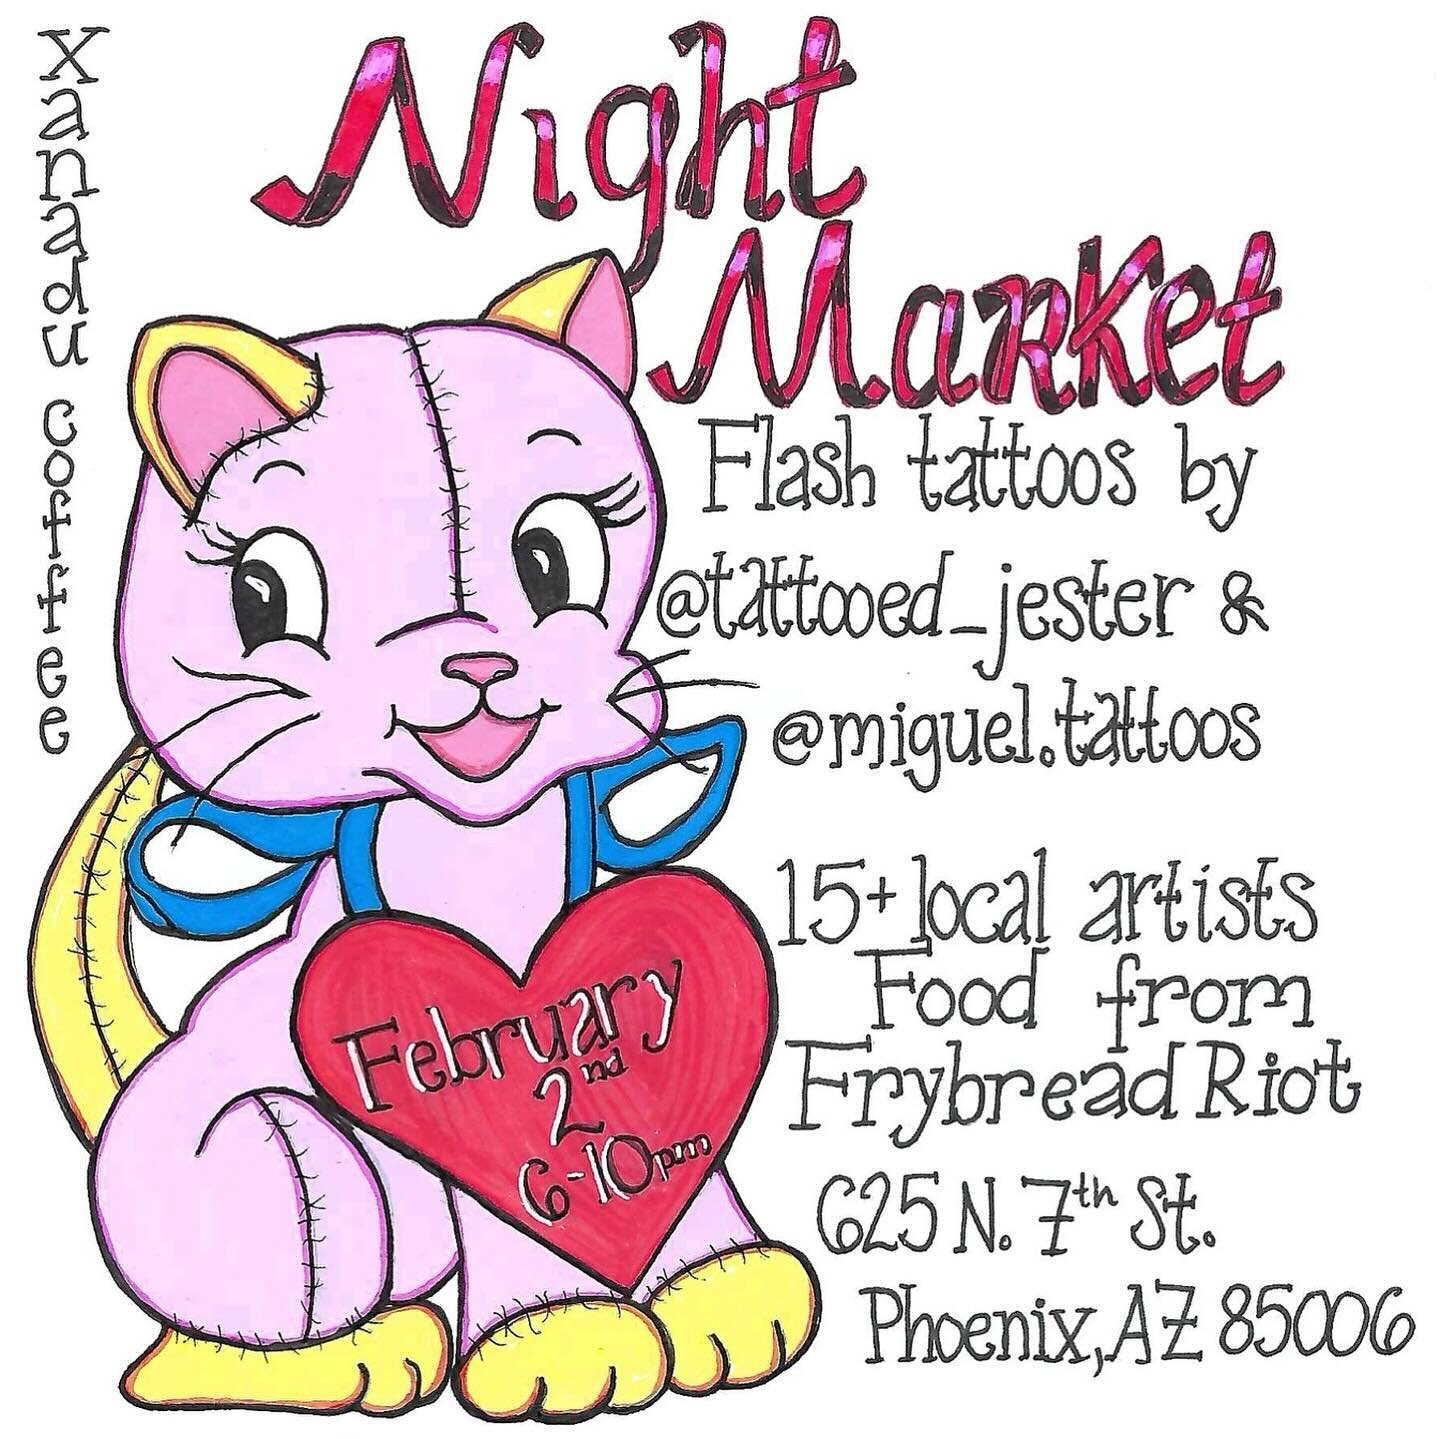 February 2nd Night Market is upon us! Come join us from 6-10pm for a night of art, food, tarot, tattoos, and more! Welcoming back @frybread.riot slinging the best frybread around! Thank you to @sadboy.studio for popping up with @tattooed_jester and @